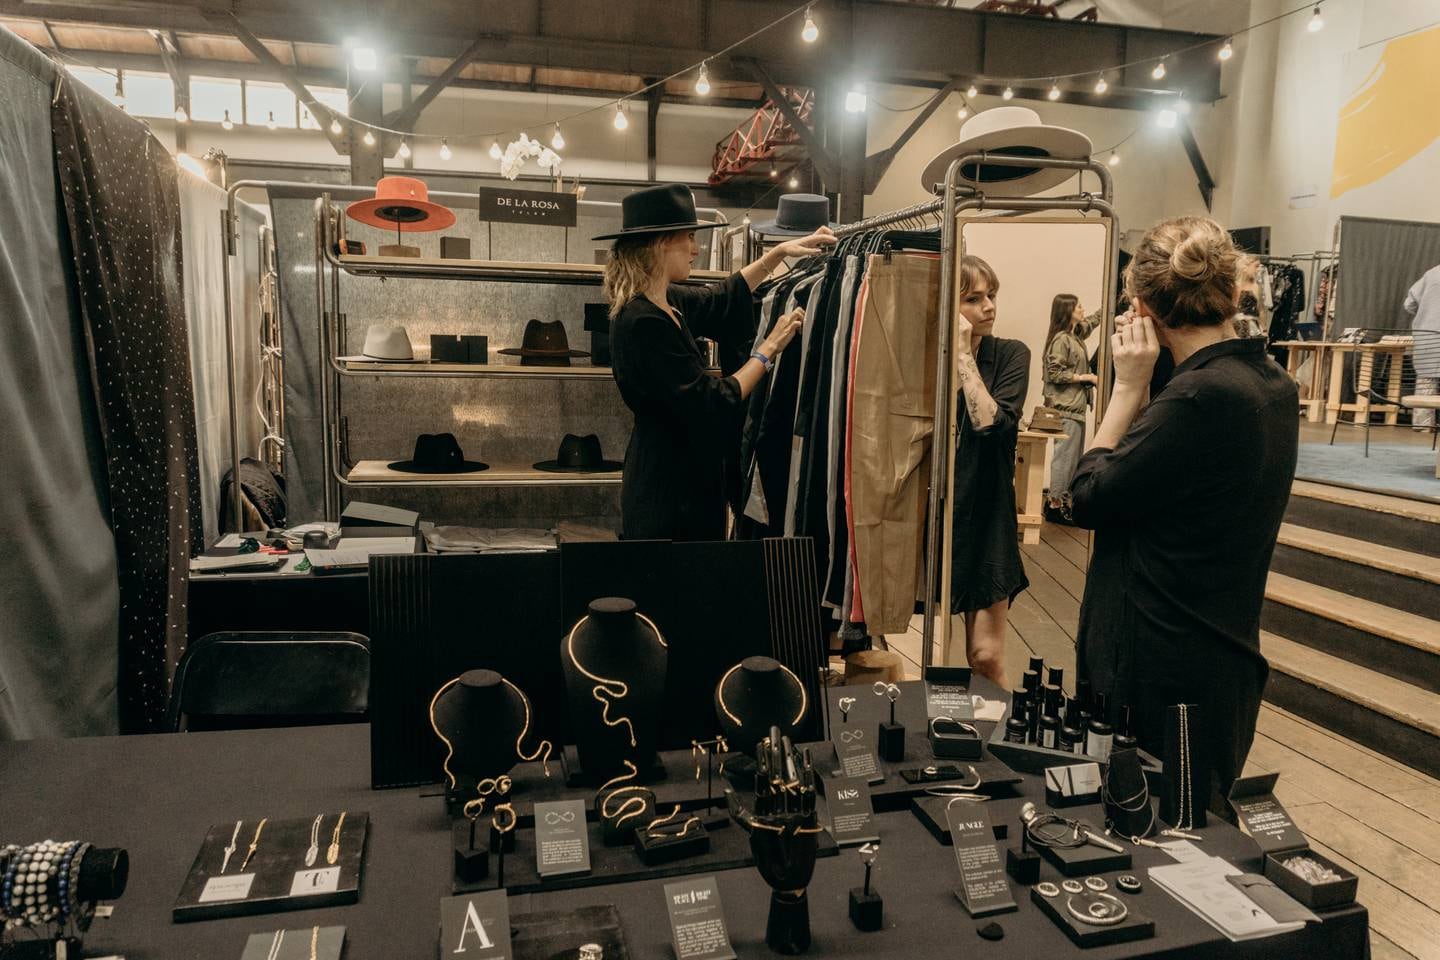 Latin American designers at Caravana Americana courted international and domestic retailers at the latest edition in Mexico City.